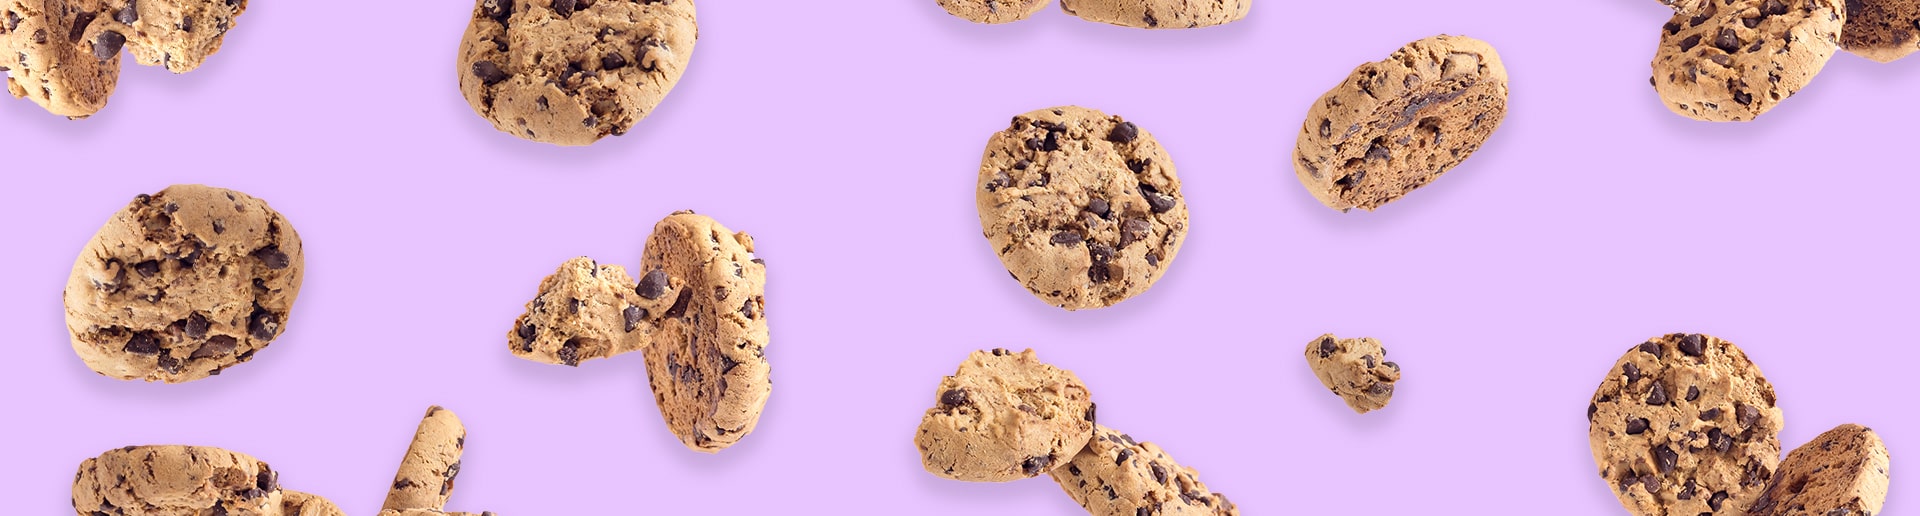 graphic of cookieless tracking metaphorically represented by chocolate chip cookies falling with a pink background